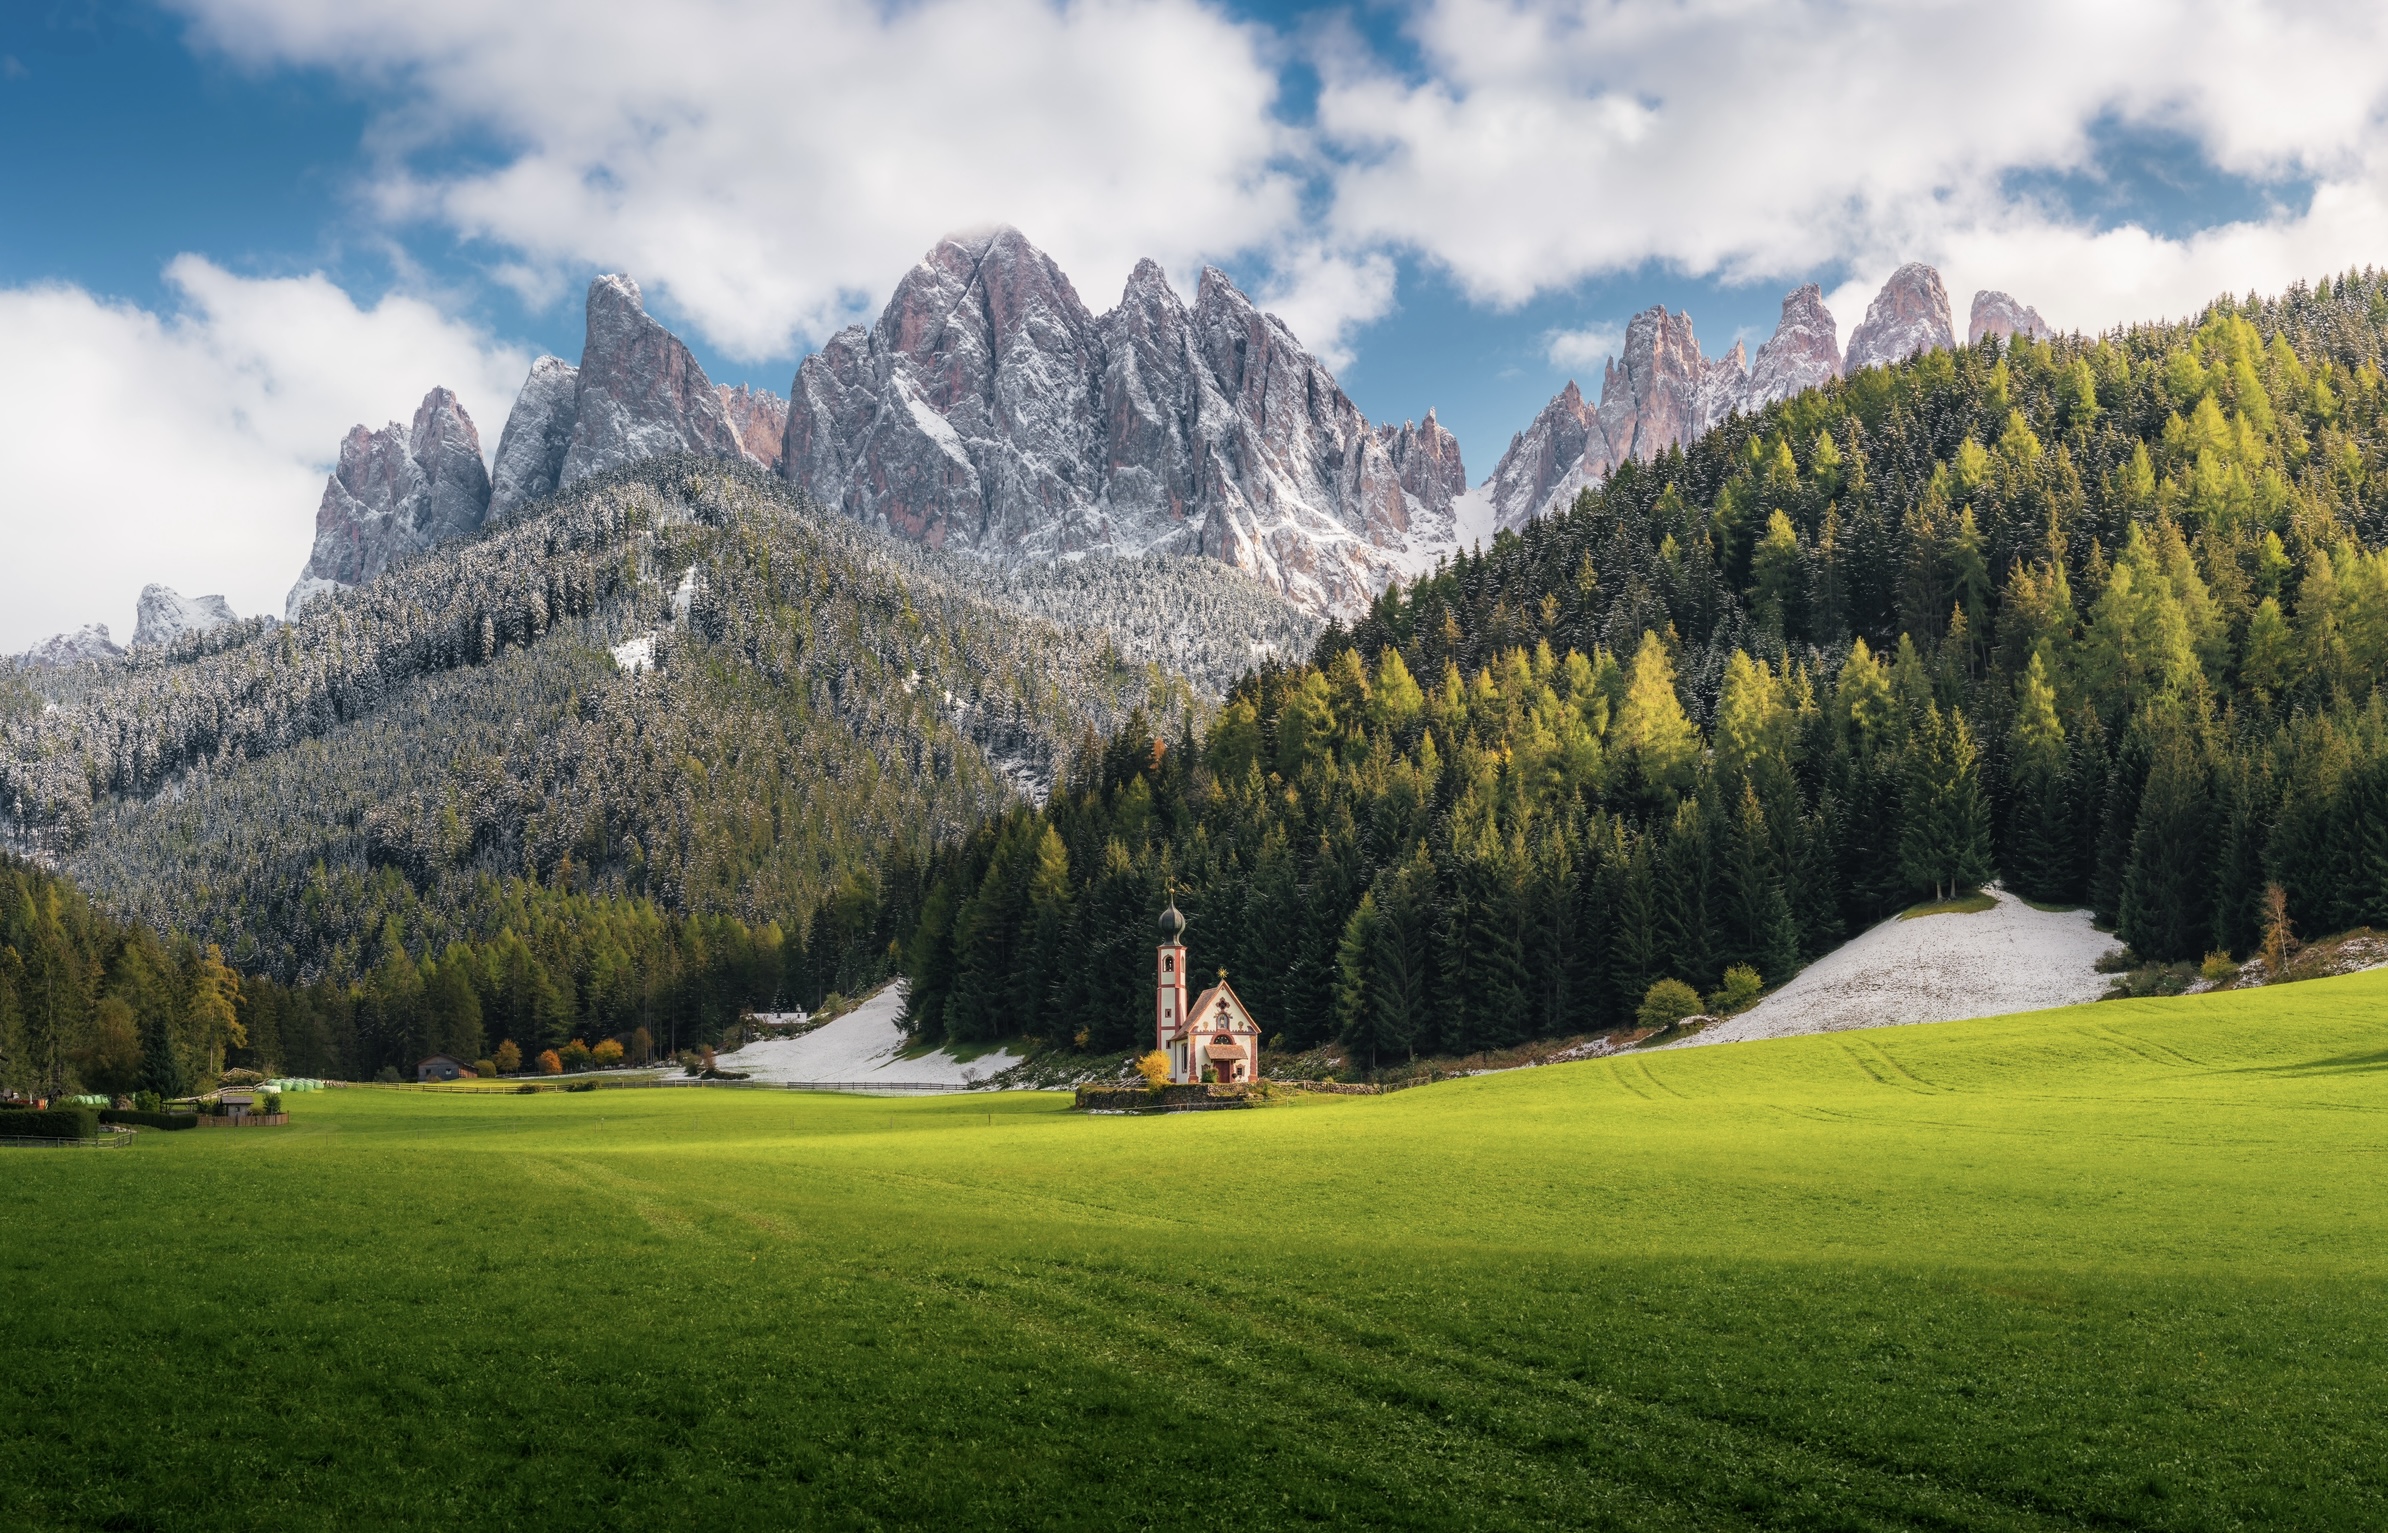 Dolomite, Italy is a beautiful mountain range that attracts many travelers every year.
Pictured: the Dolomite mountain range with snowy peaks and green valleys